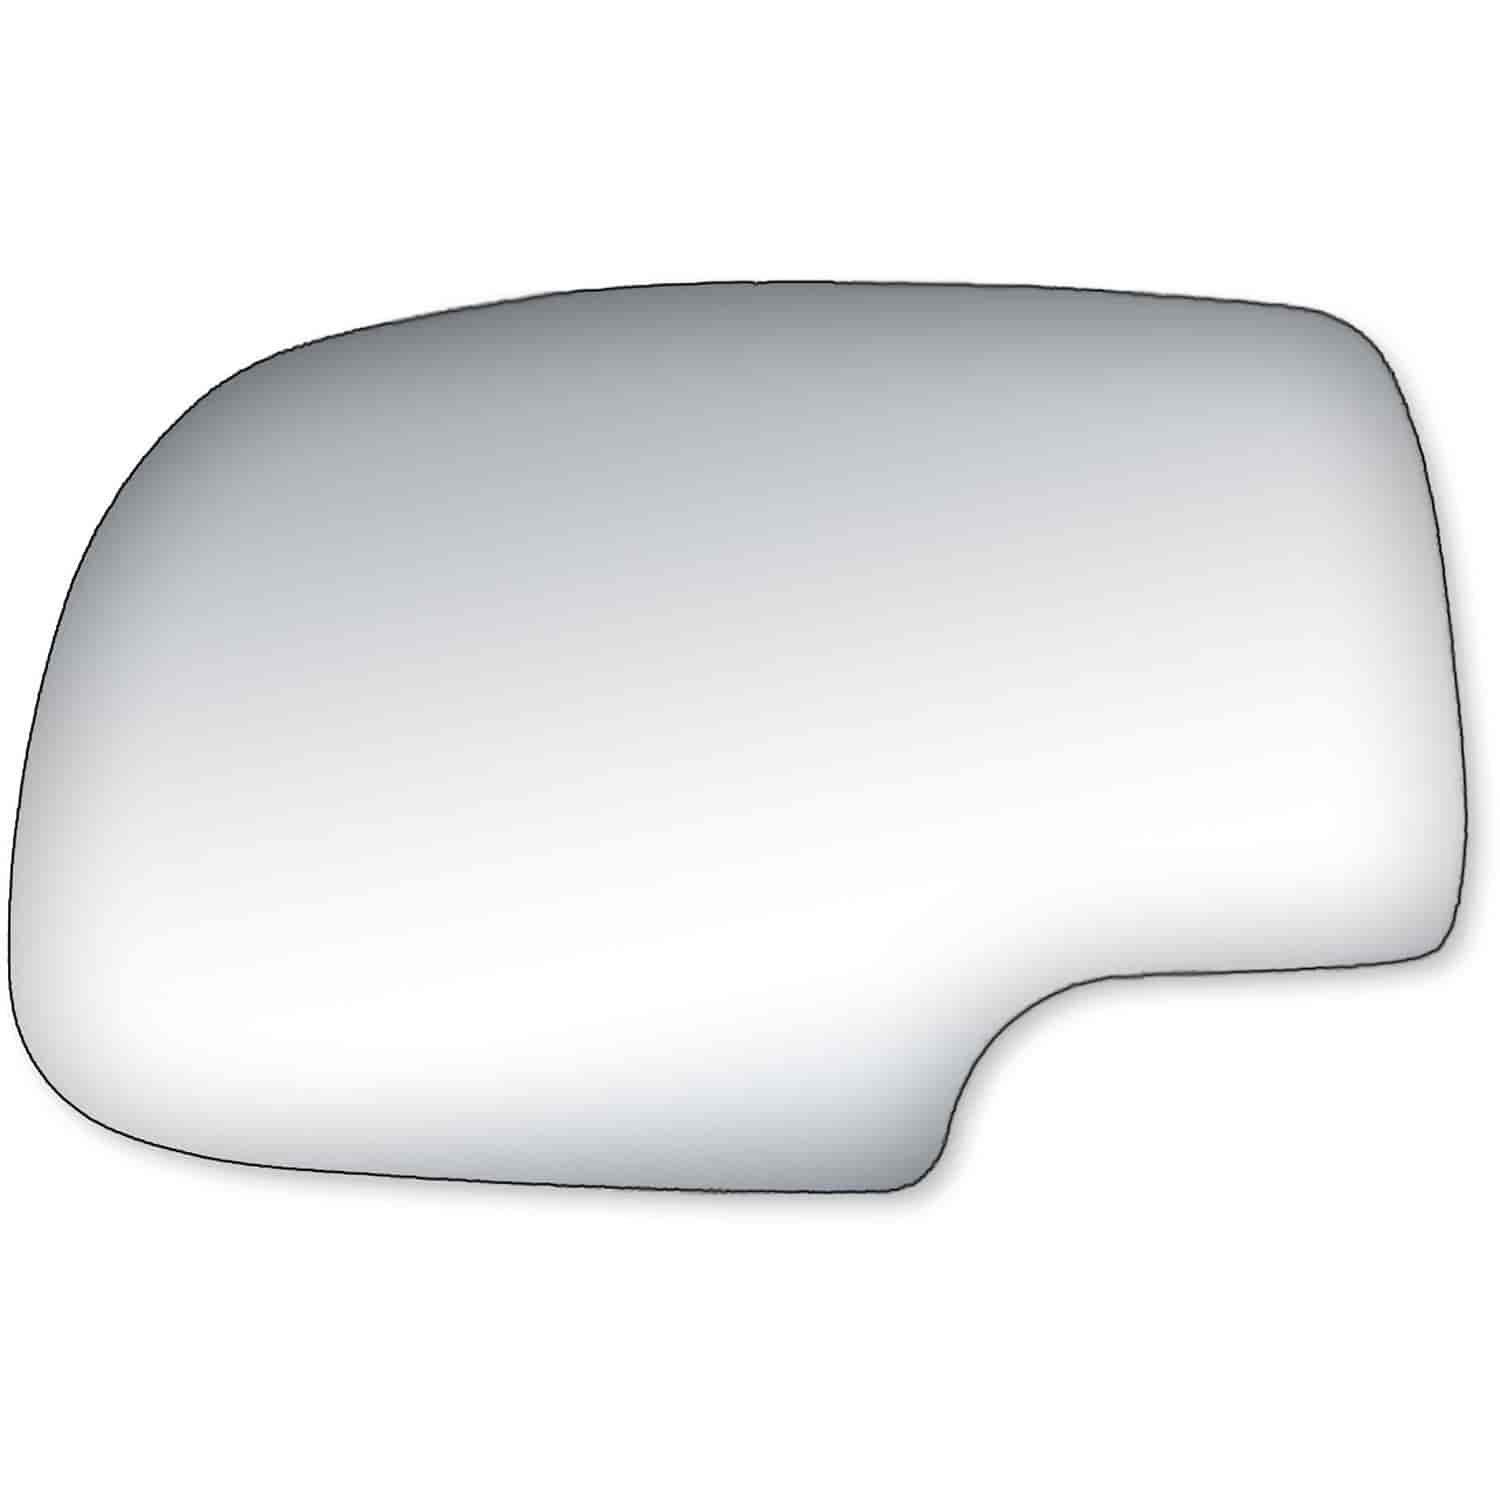 OE Replacement Glass Fits 1999 to 2006 Chevy Silverado & GMC Sierra